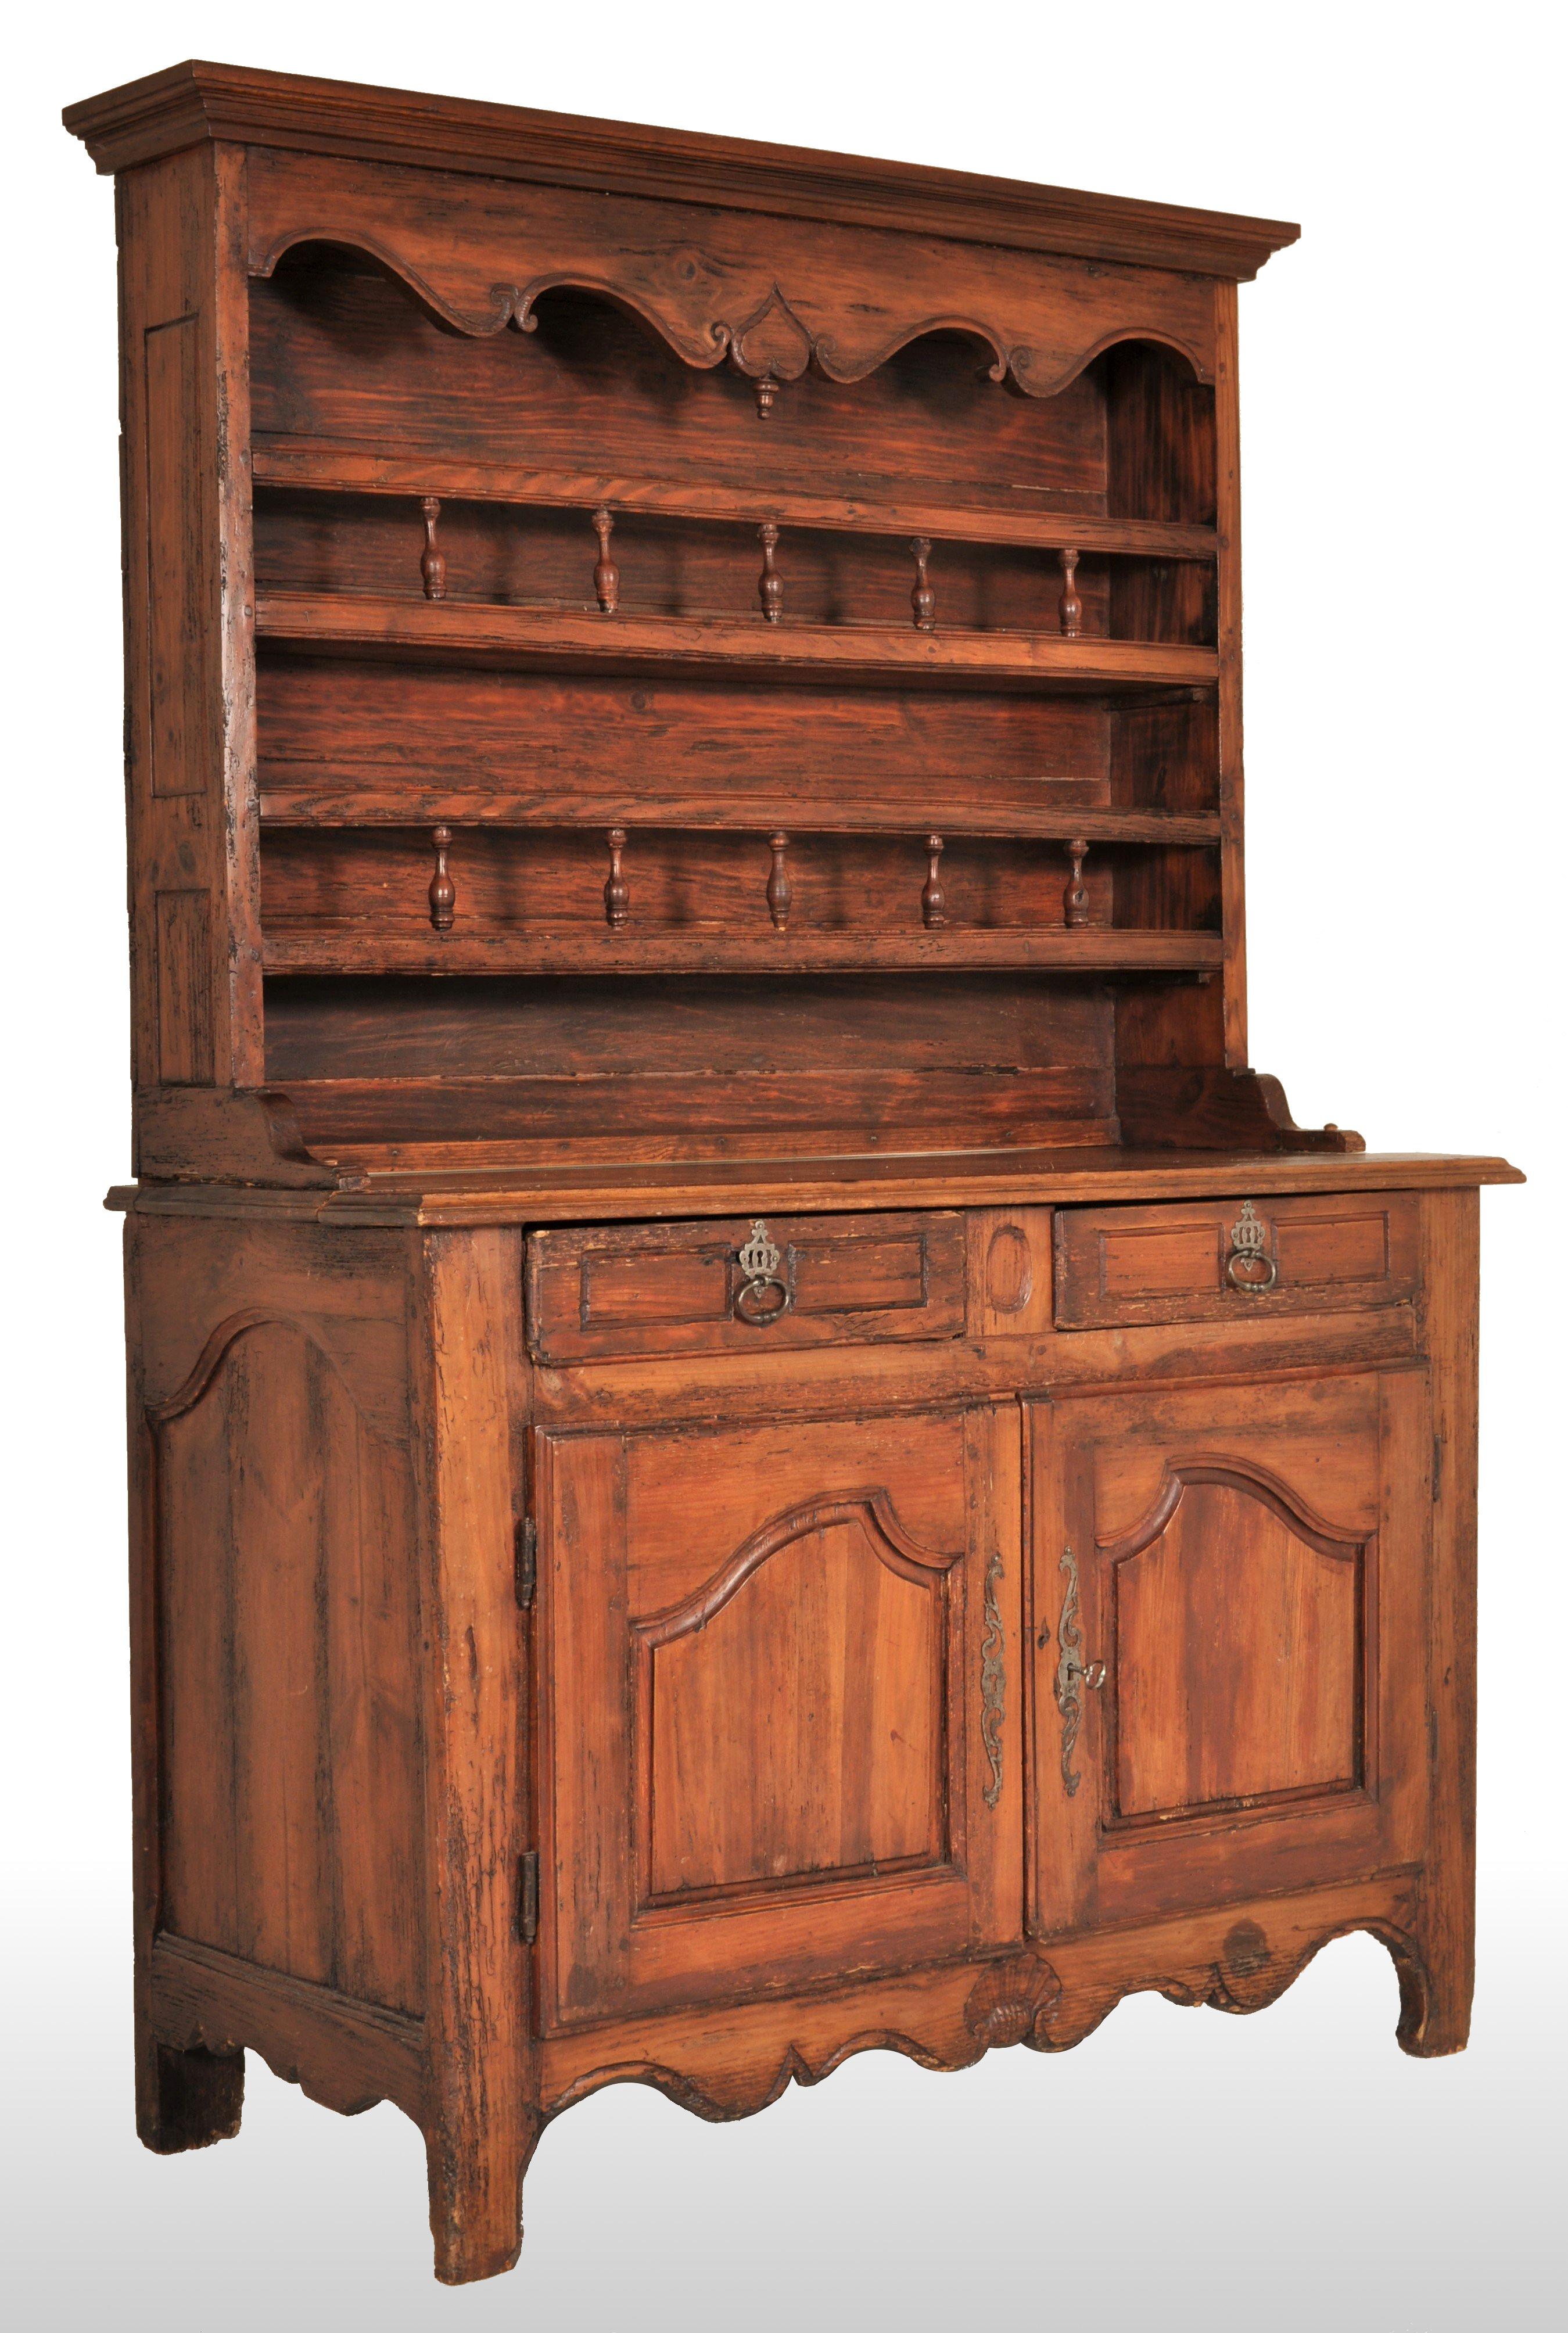 Antique 18th century French provincial dresser / buffet / sideboard / server / vaisselier, circa 1750. An unusually diminutive normandy dresser made from walnut and pine, the back having a plate rack with two spindled shelves and a shaped and carved